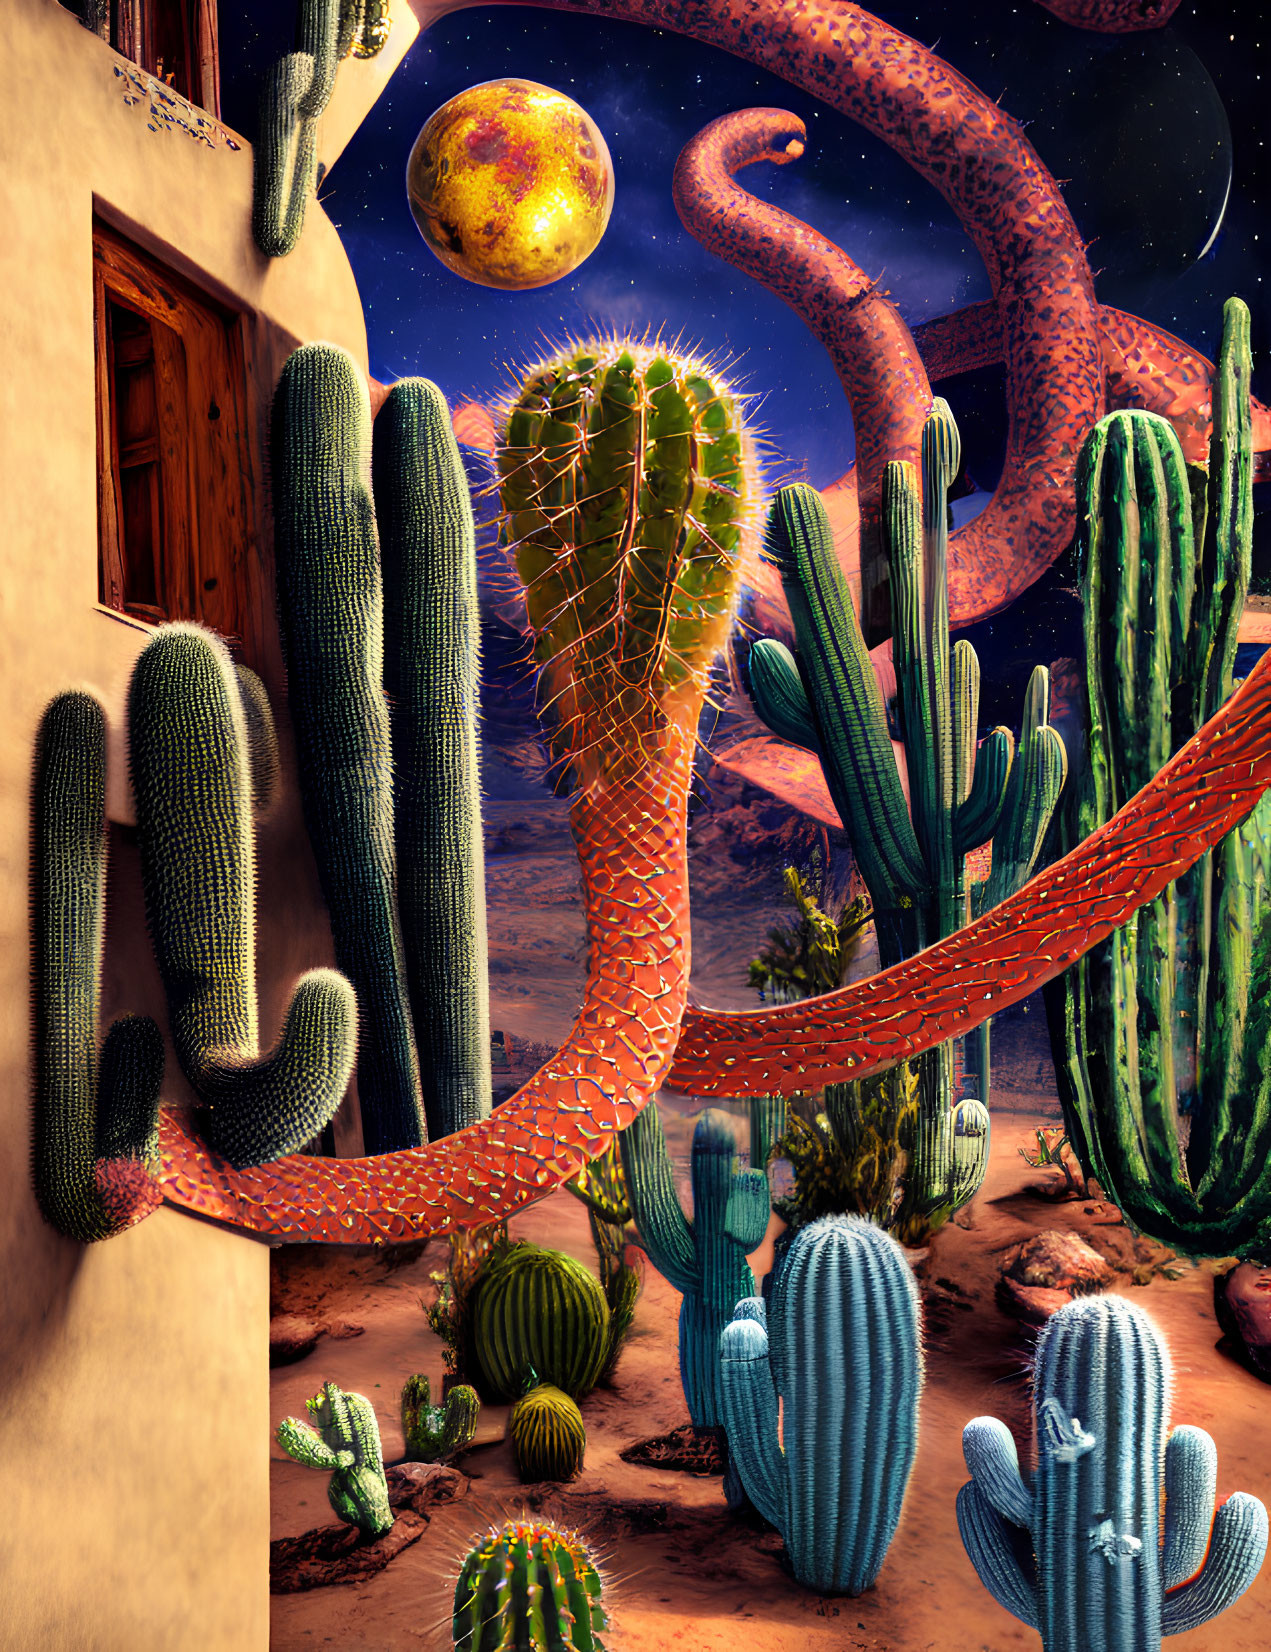 Surreal desert landscape with cacti and octopus tentacles under starry sky